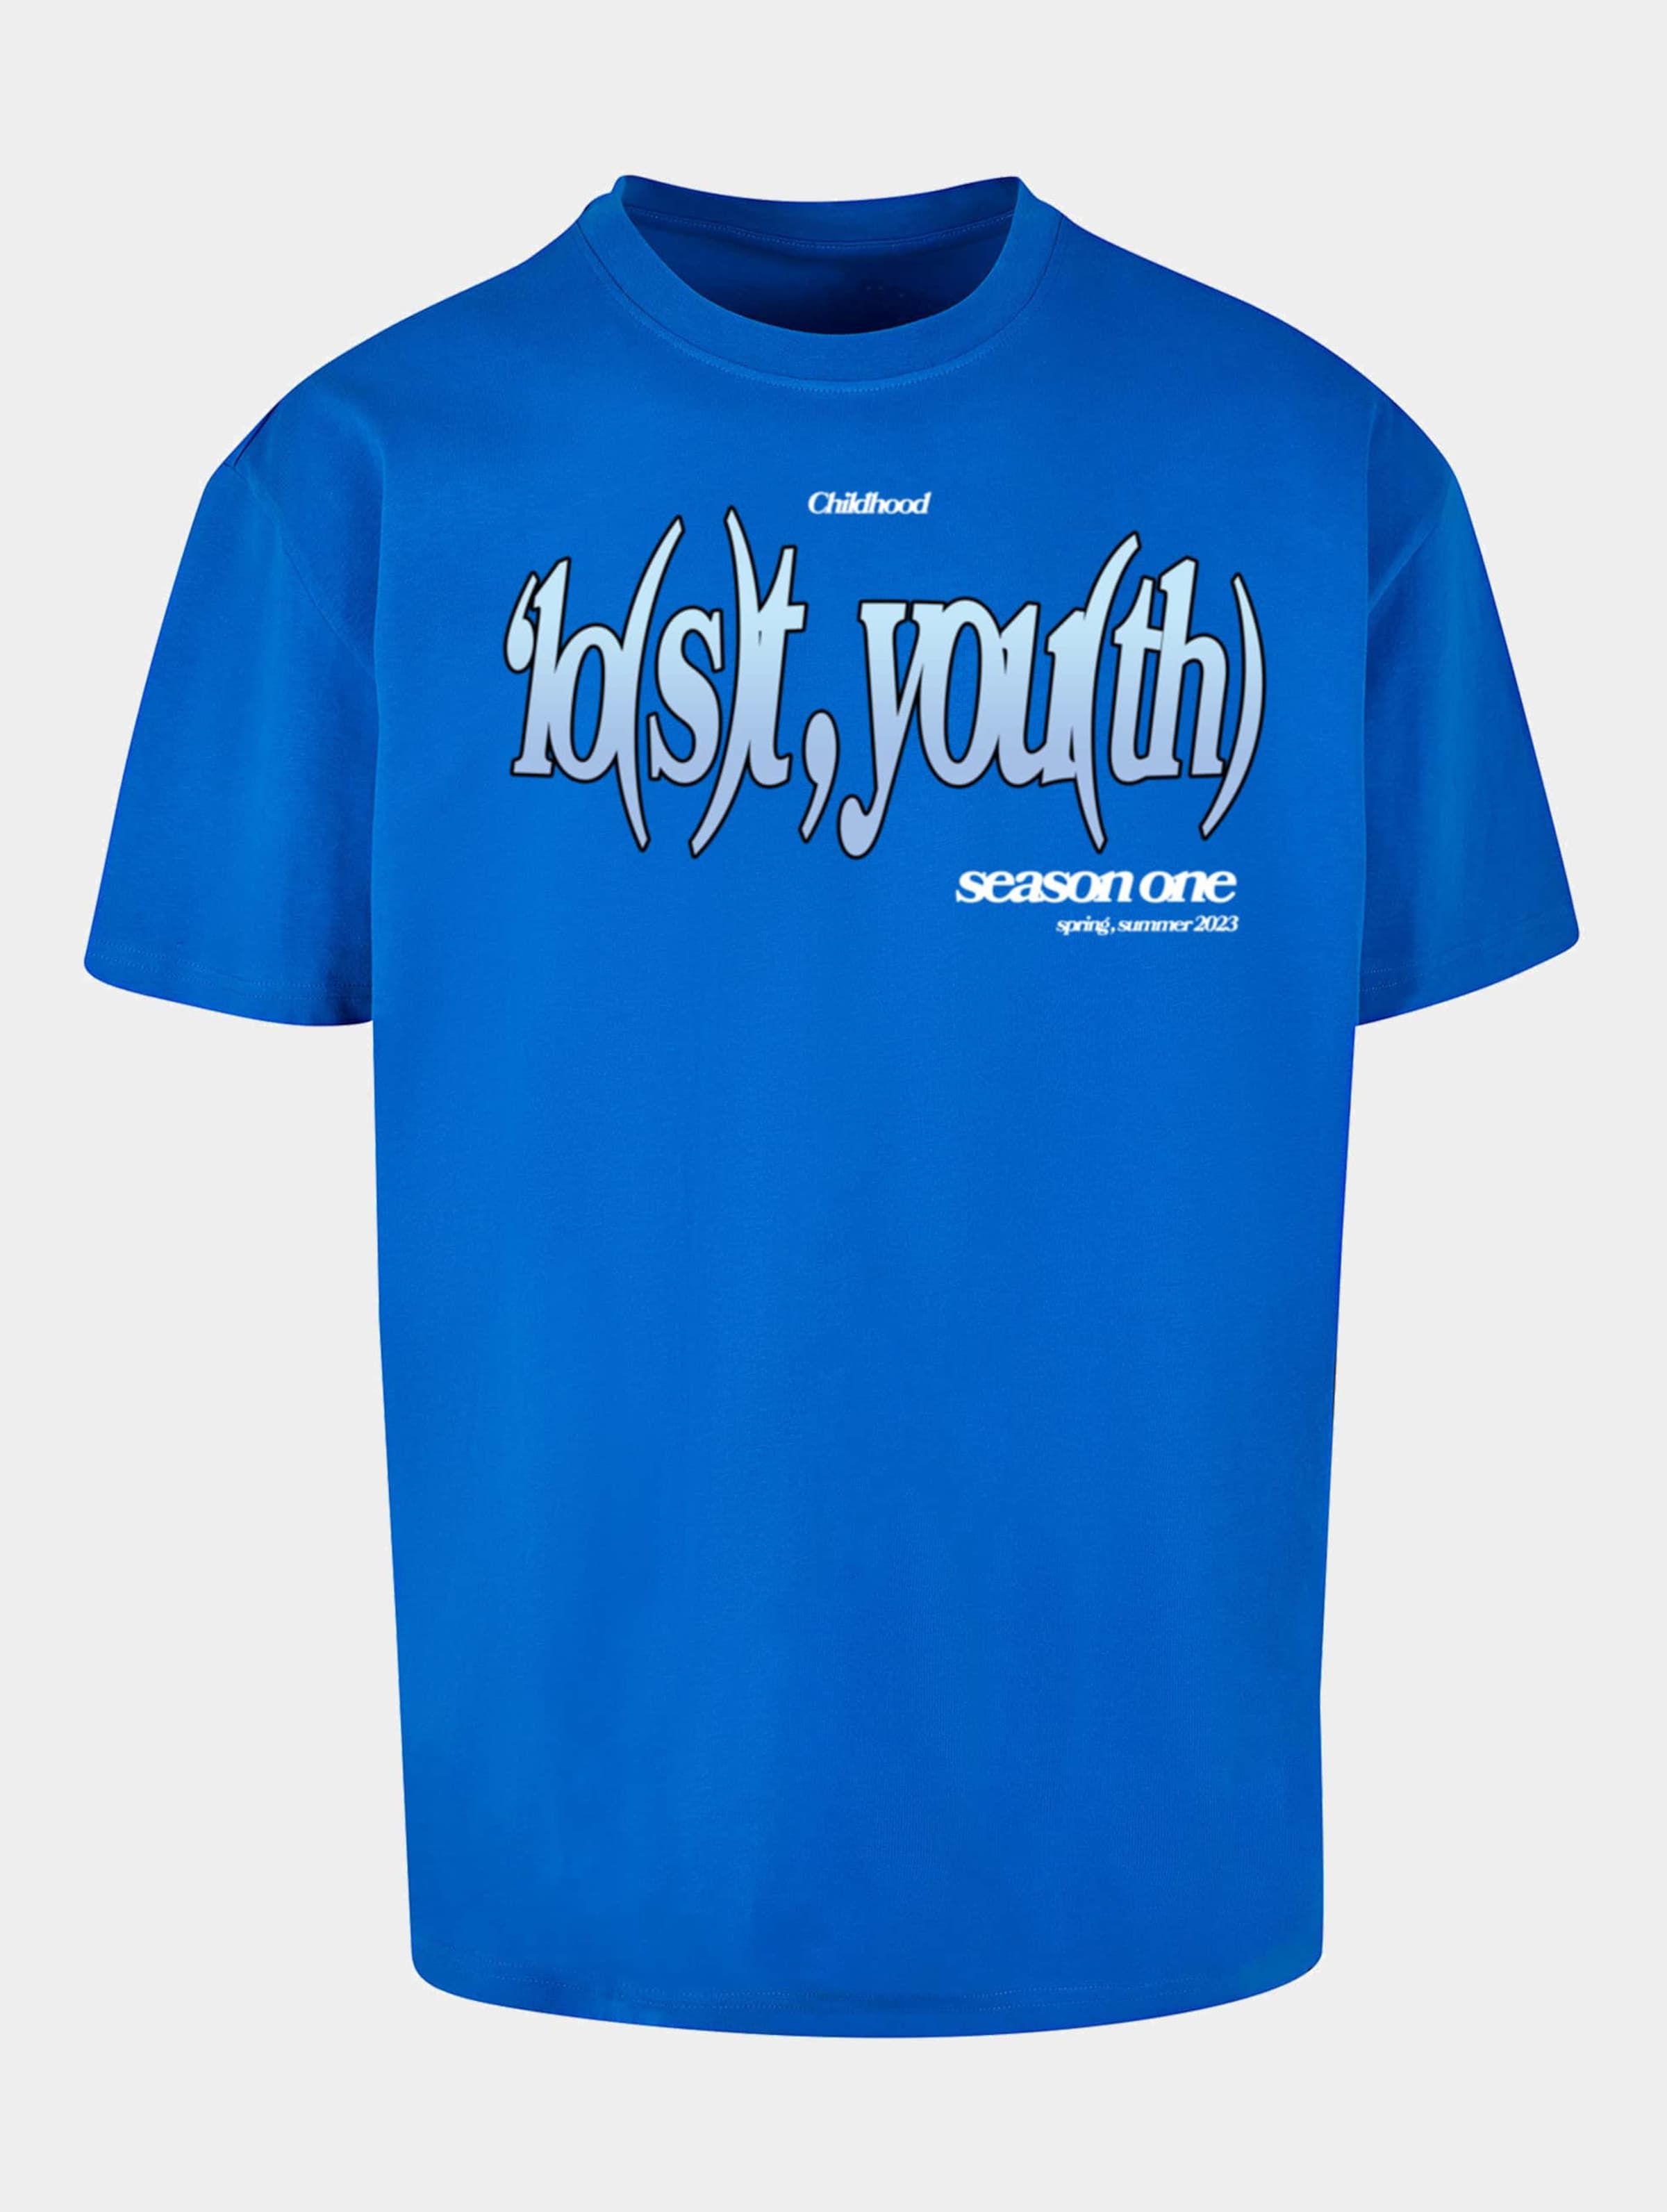 Lost Youth LY TEE - ICON V.7 Männer,Unisex op kleur blauw, Maat XL